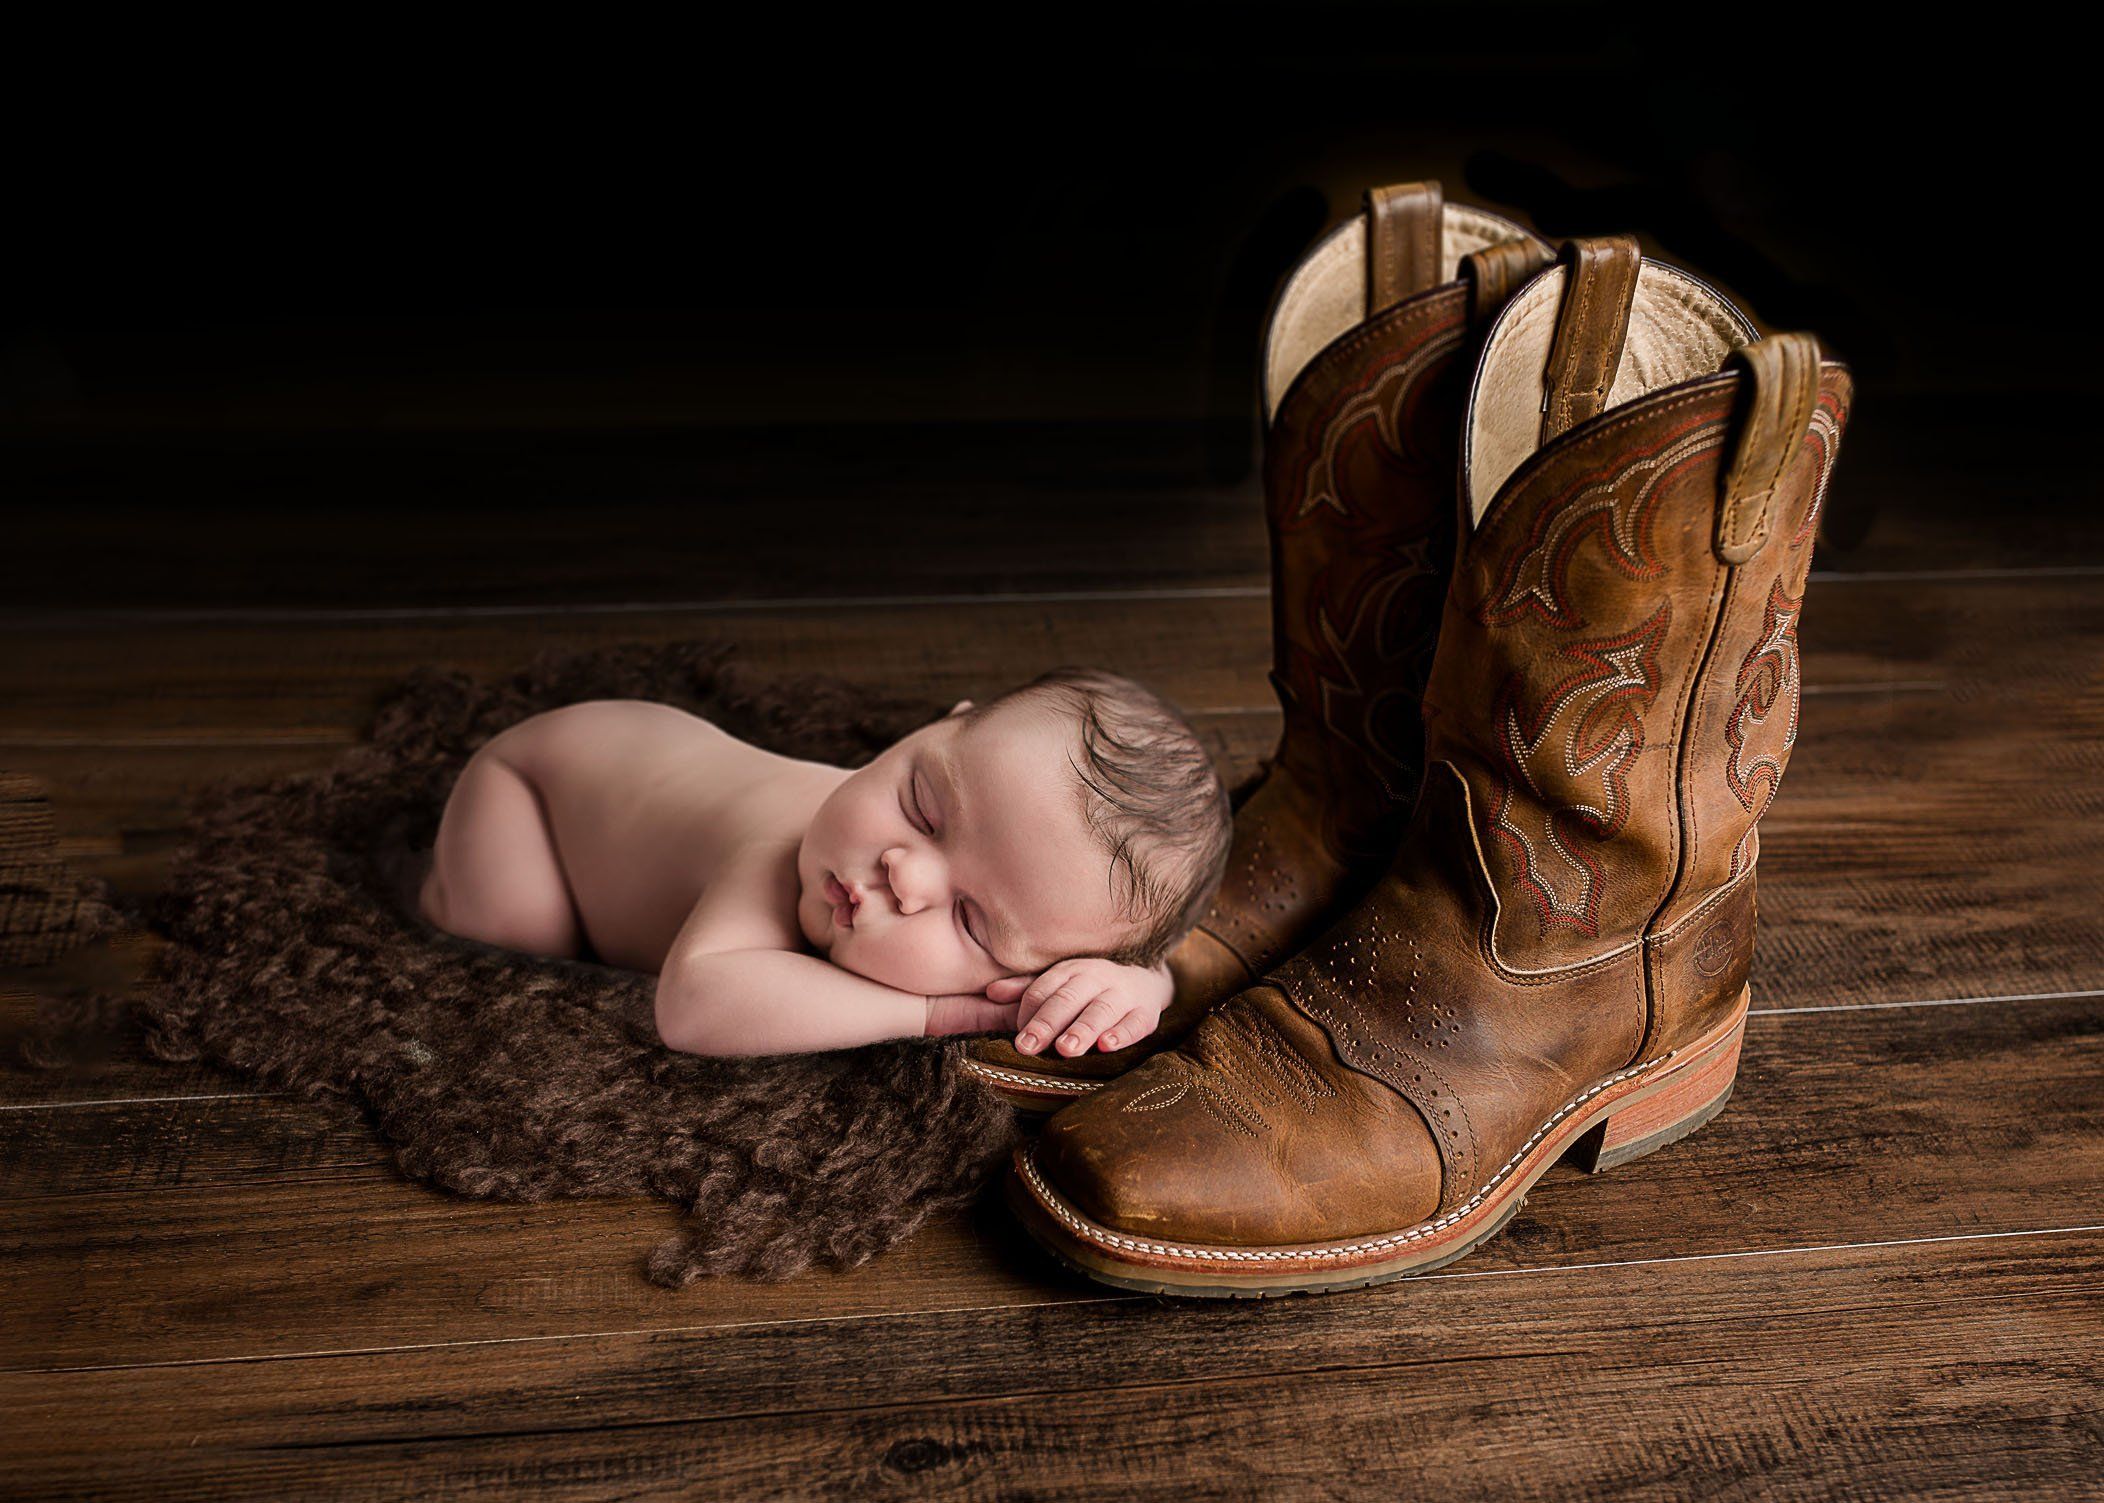 Newborn baby sleeping with head and hands on cowboy boots One Big Happy Photo Amber Sehrt Newborn baby sleeping with head and hands on cowboy boots One Big Happy Photo Amber Sehrt